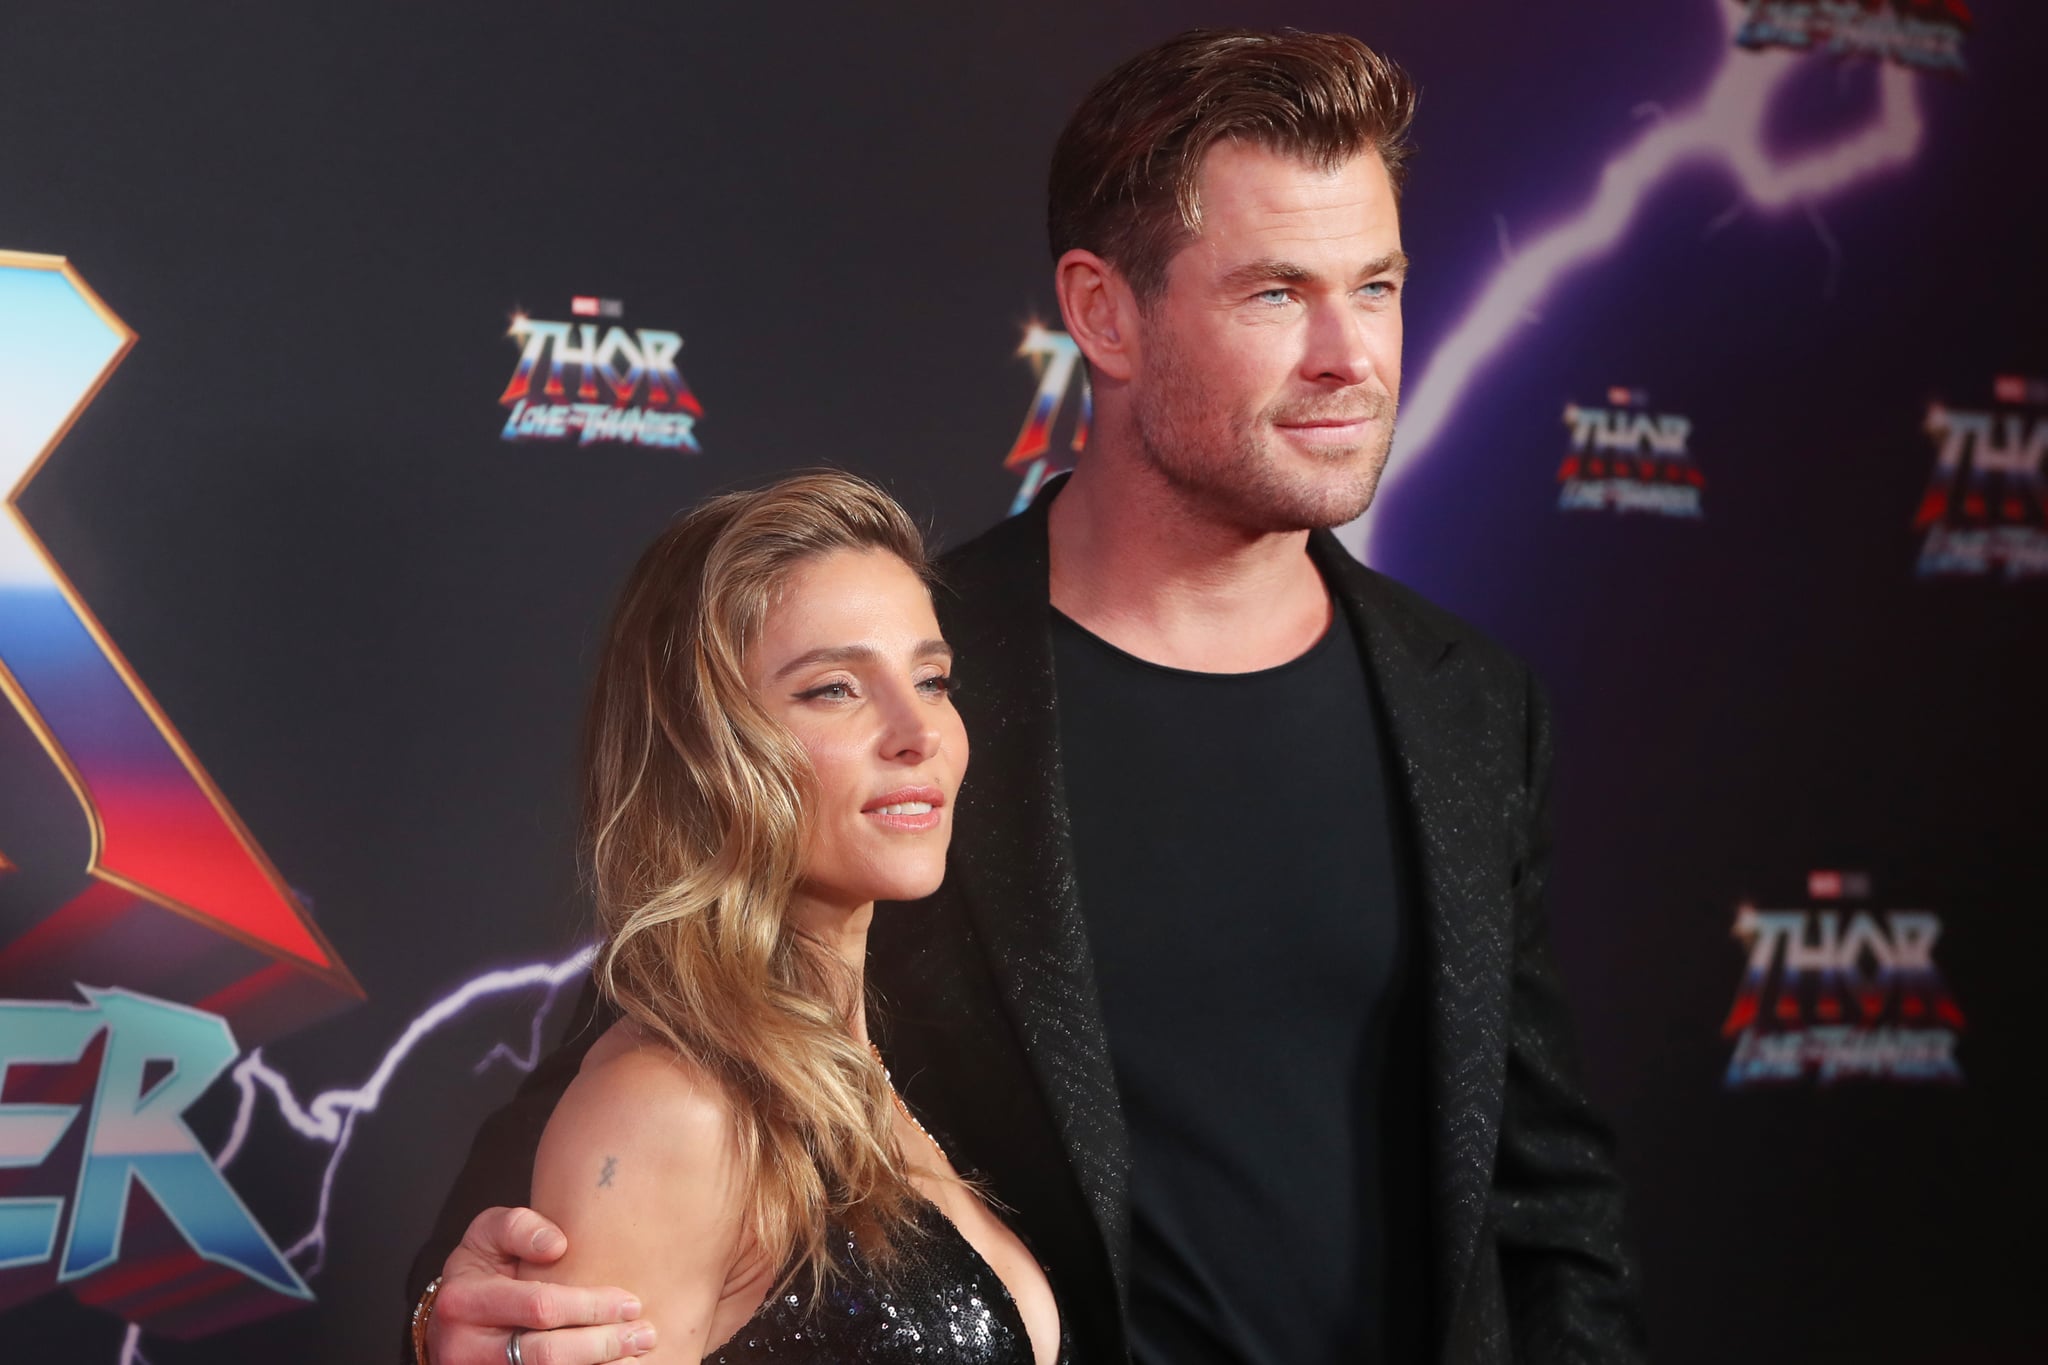 SYDNEY, AUSTRALIA - JUNE 27: Chris Hemsworth and Elsa Pataky attend the Sydney premiere of Thor: Love And Thunder at Hoyts Entertainment Quarter on June 27, 2022 in Sydney, Australia. (Photo by Lisa Maree Williams/Getty Images)